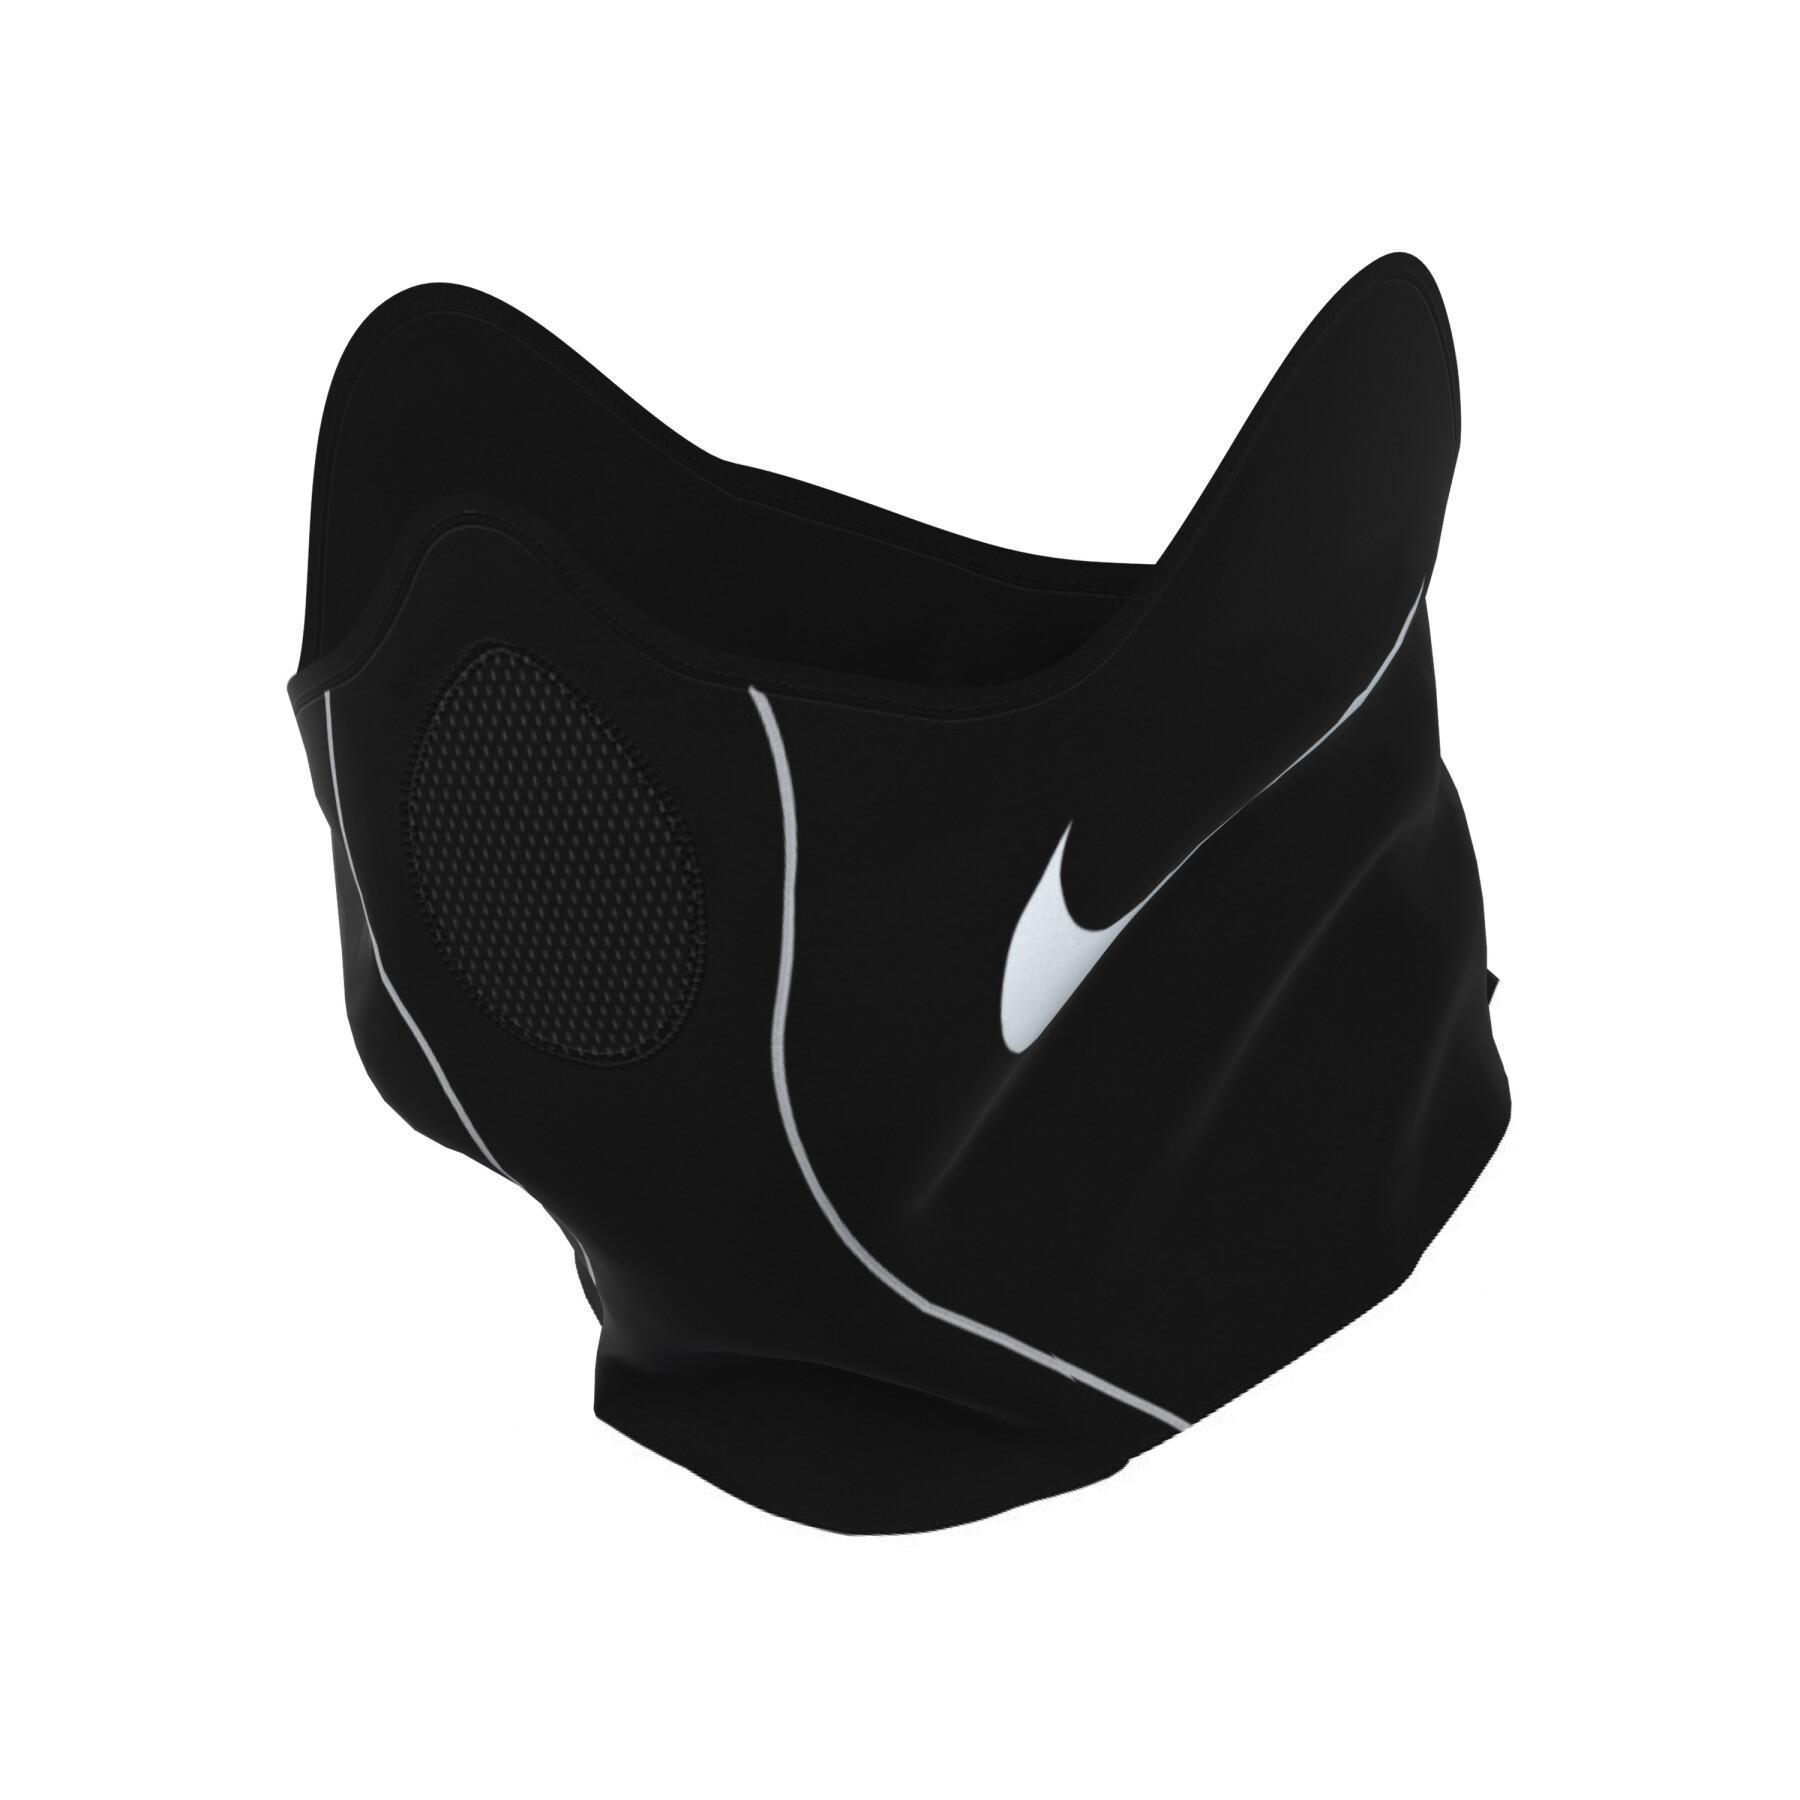 Neck cover Nike dynamic fit strikee